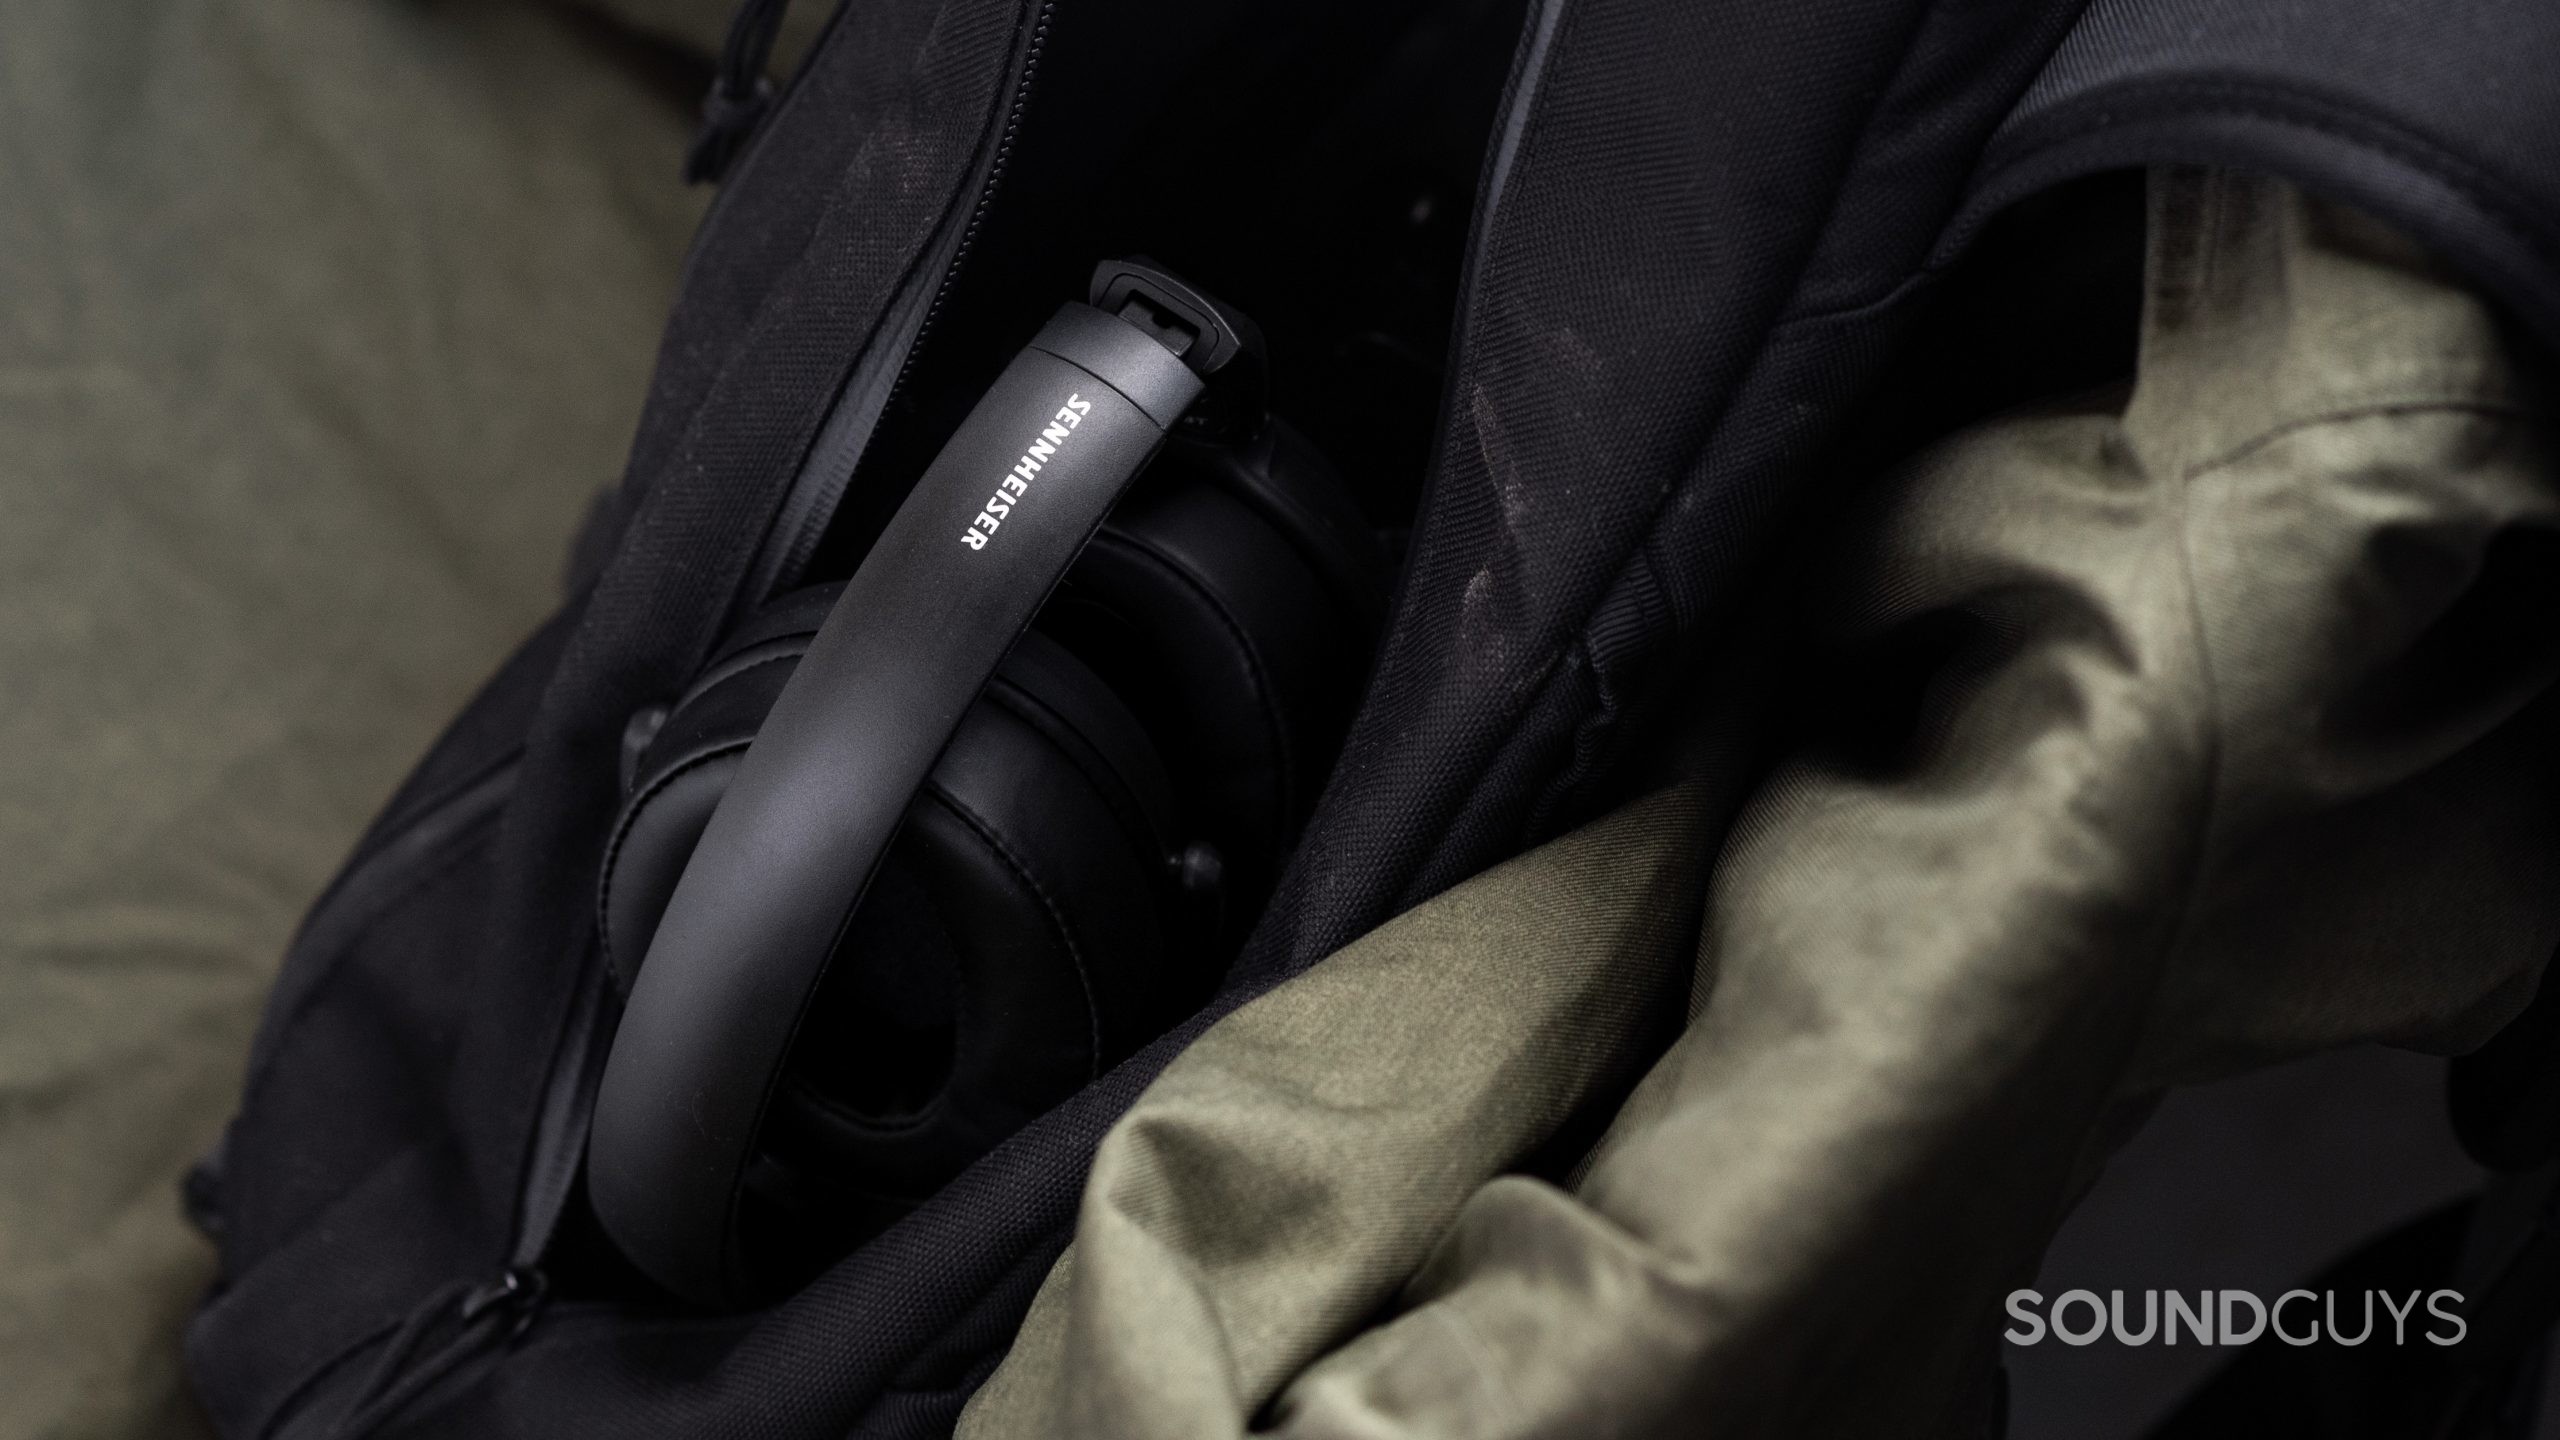 The Sennheiser HD 350BT Bluetooth headphones headband with the company logo facing upward, as the it sits in an open sling bag.